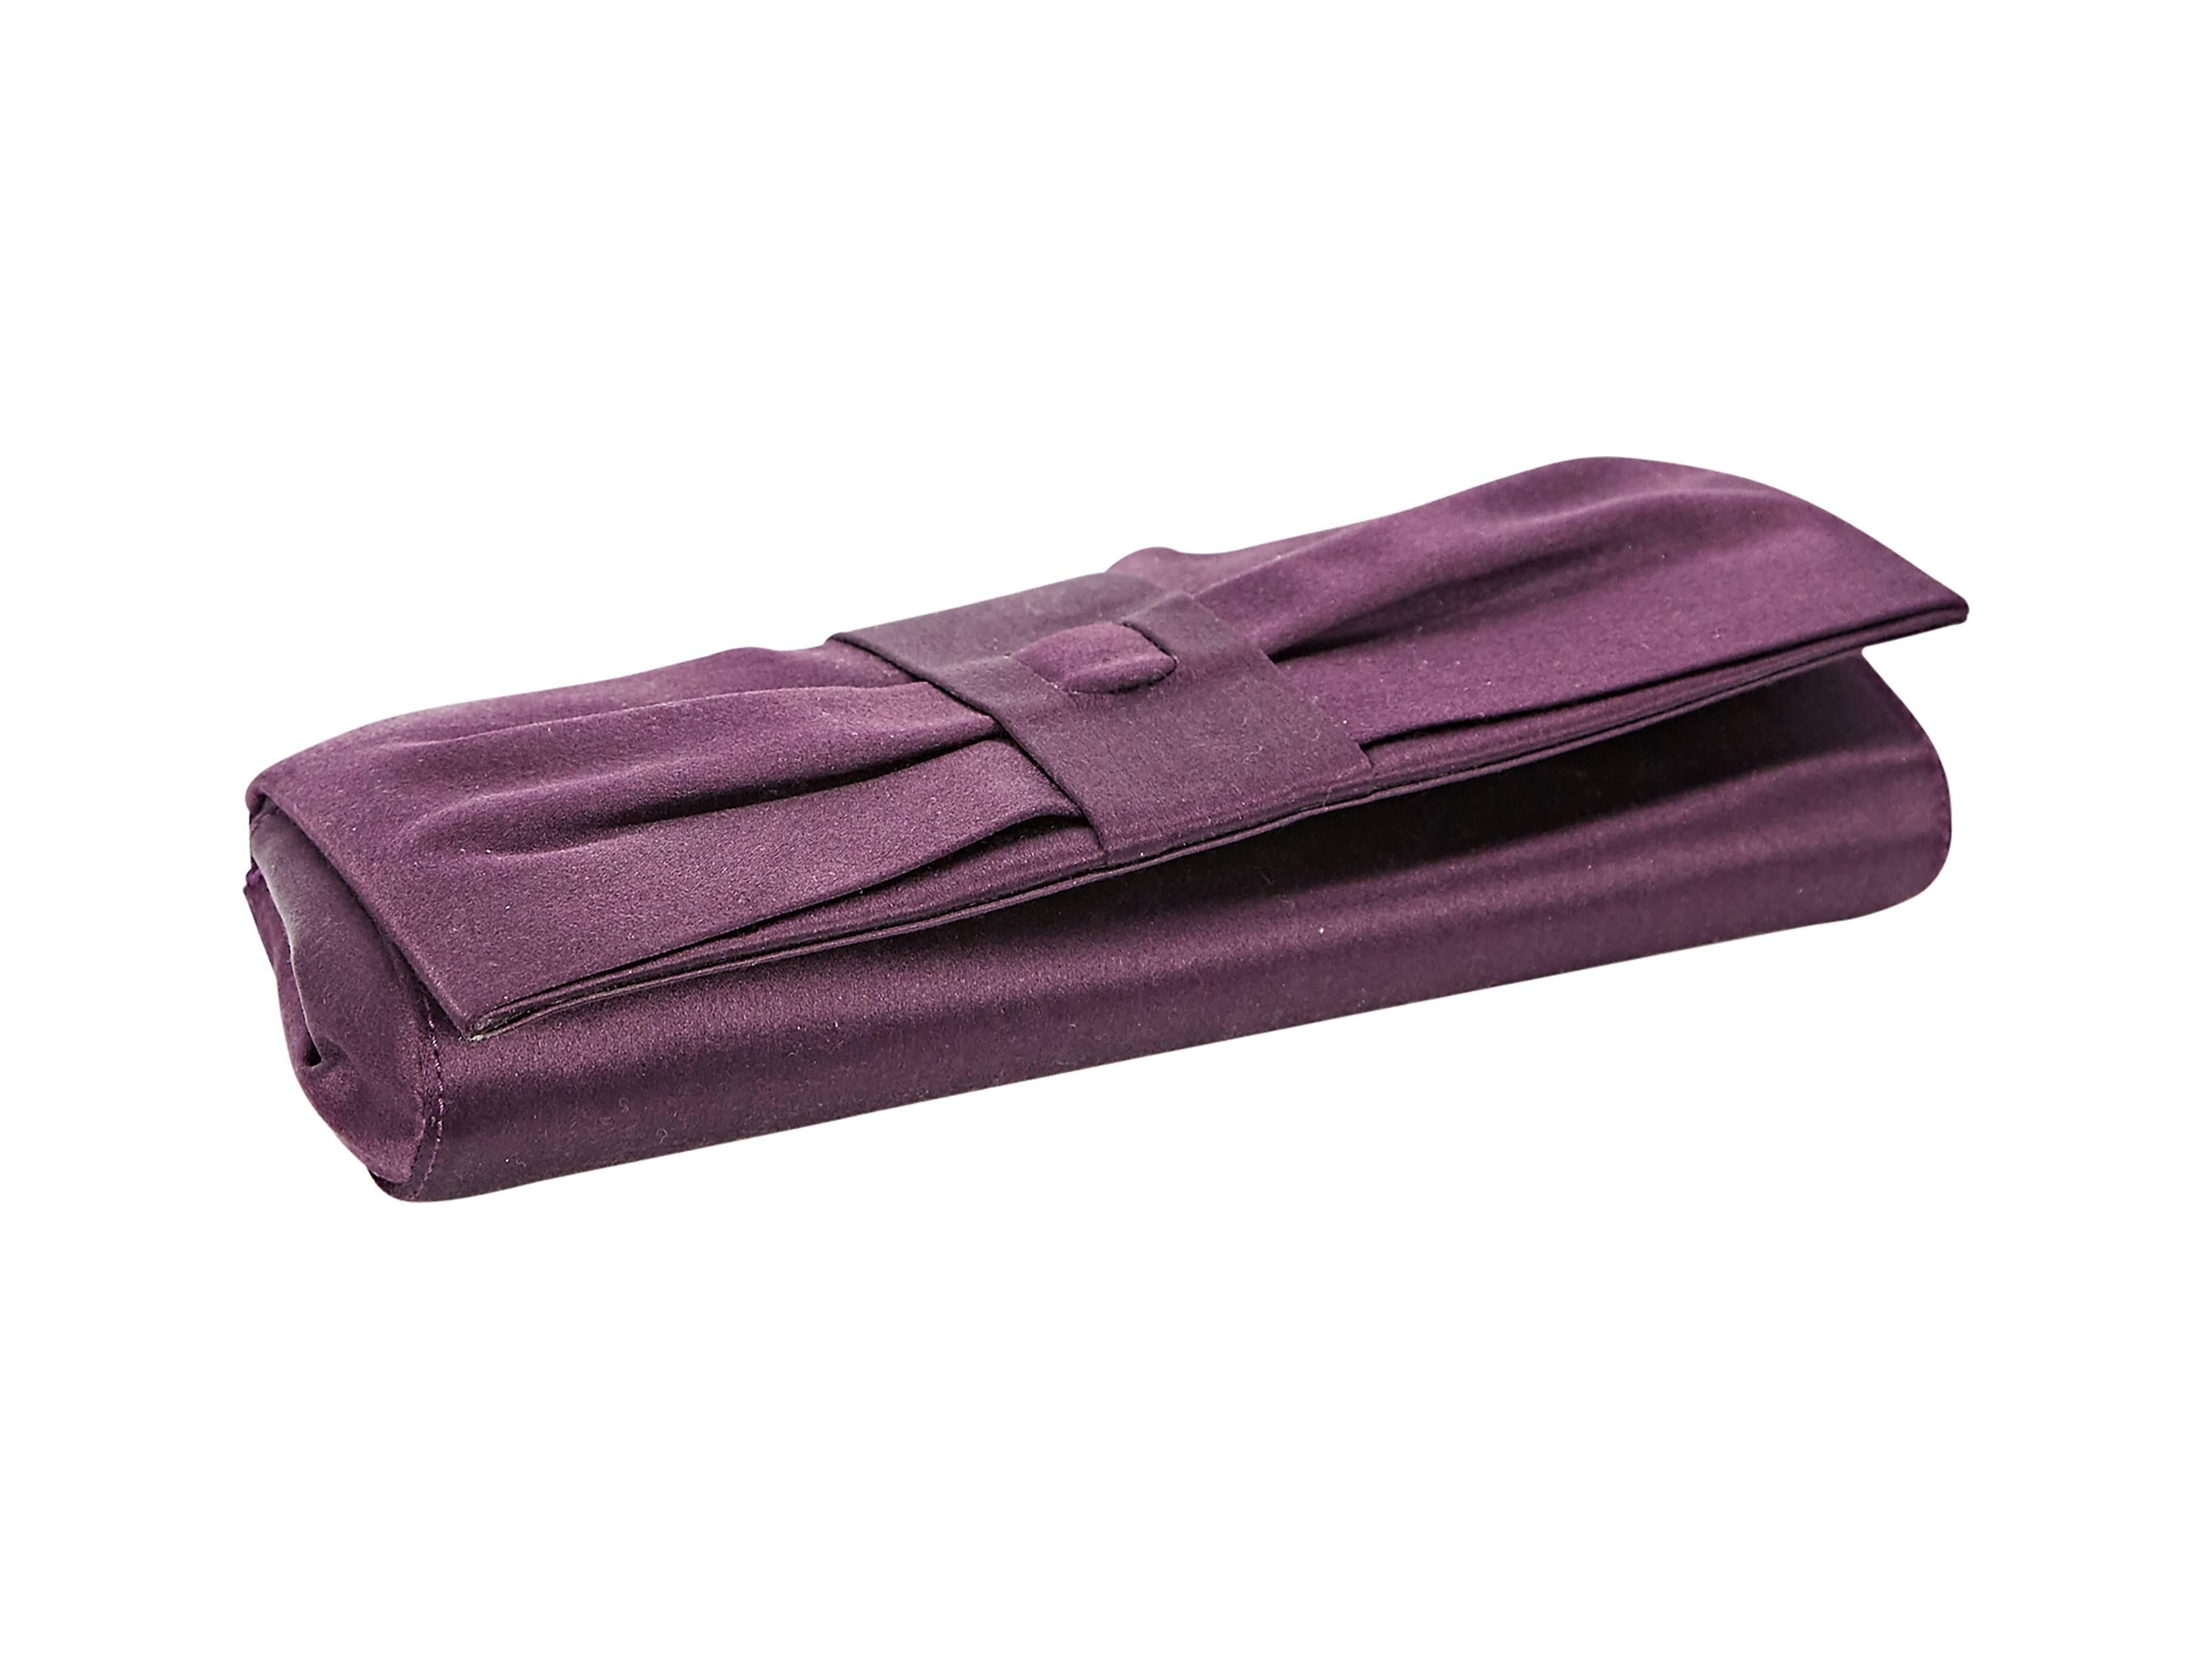 Purple pleated satin clutch by Valentino.  Front flap with hidden magnetic closure.  Lined interior with inner slide pocket.  9